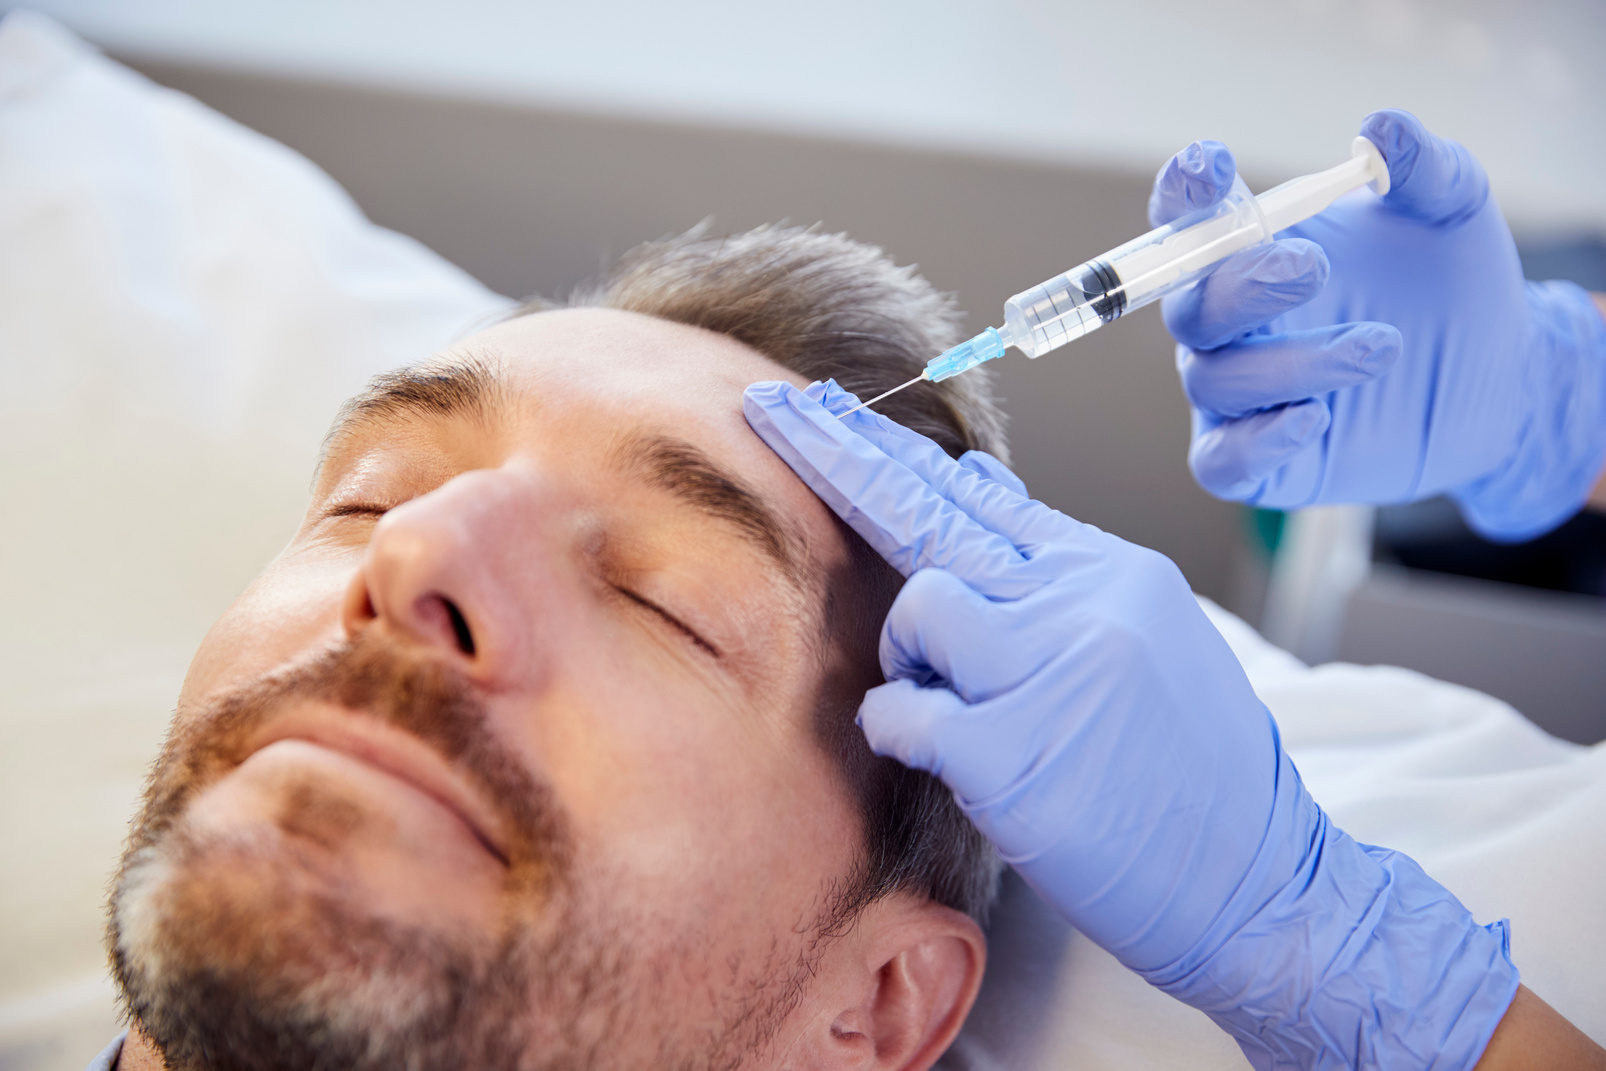 Female Beautician Giving Mature Male Patient Botox Injection in